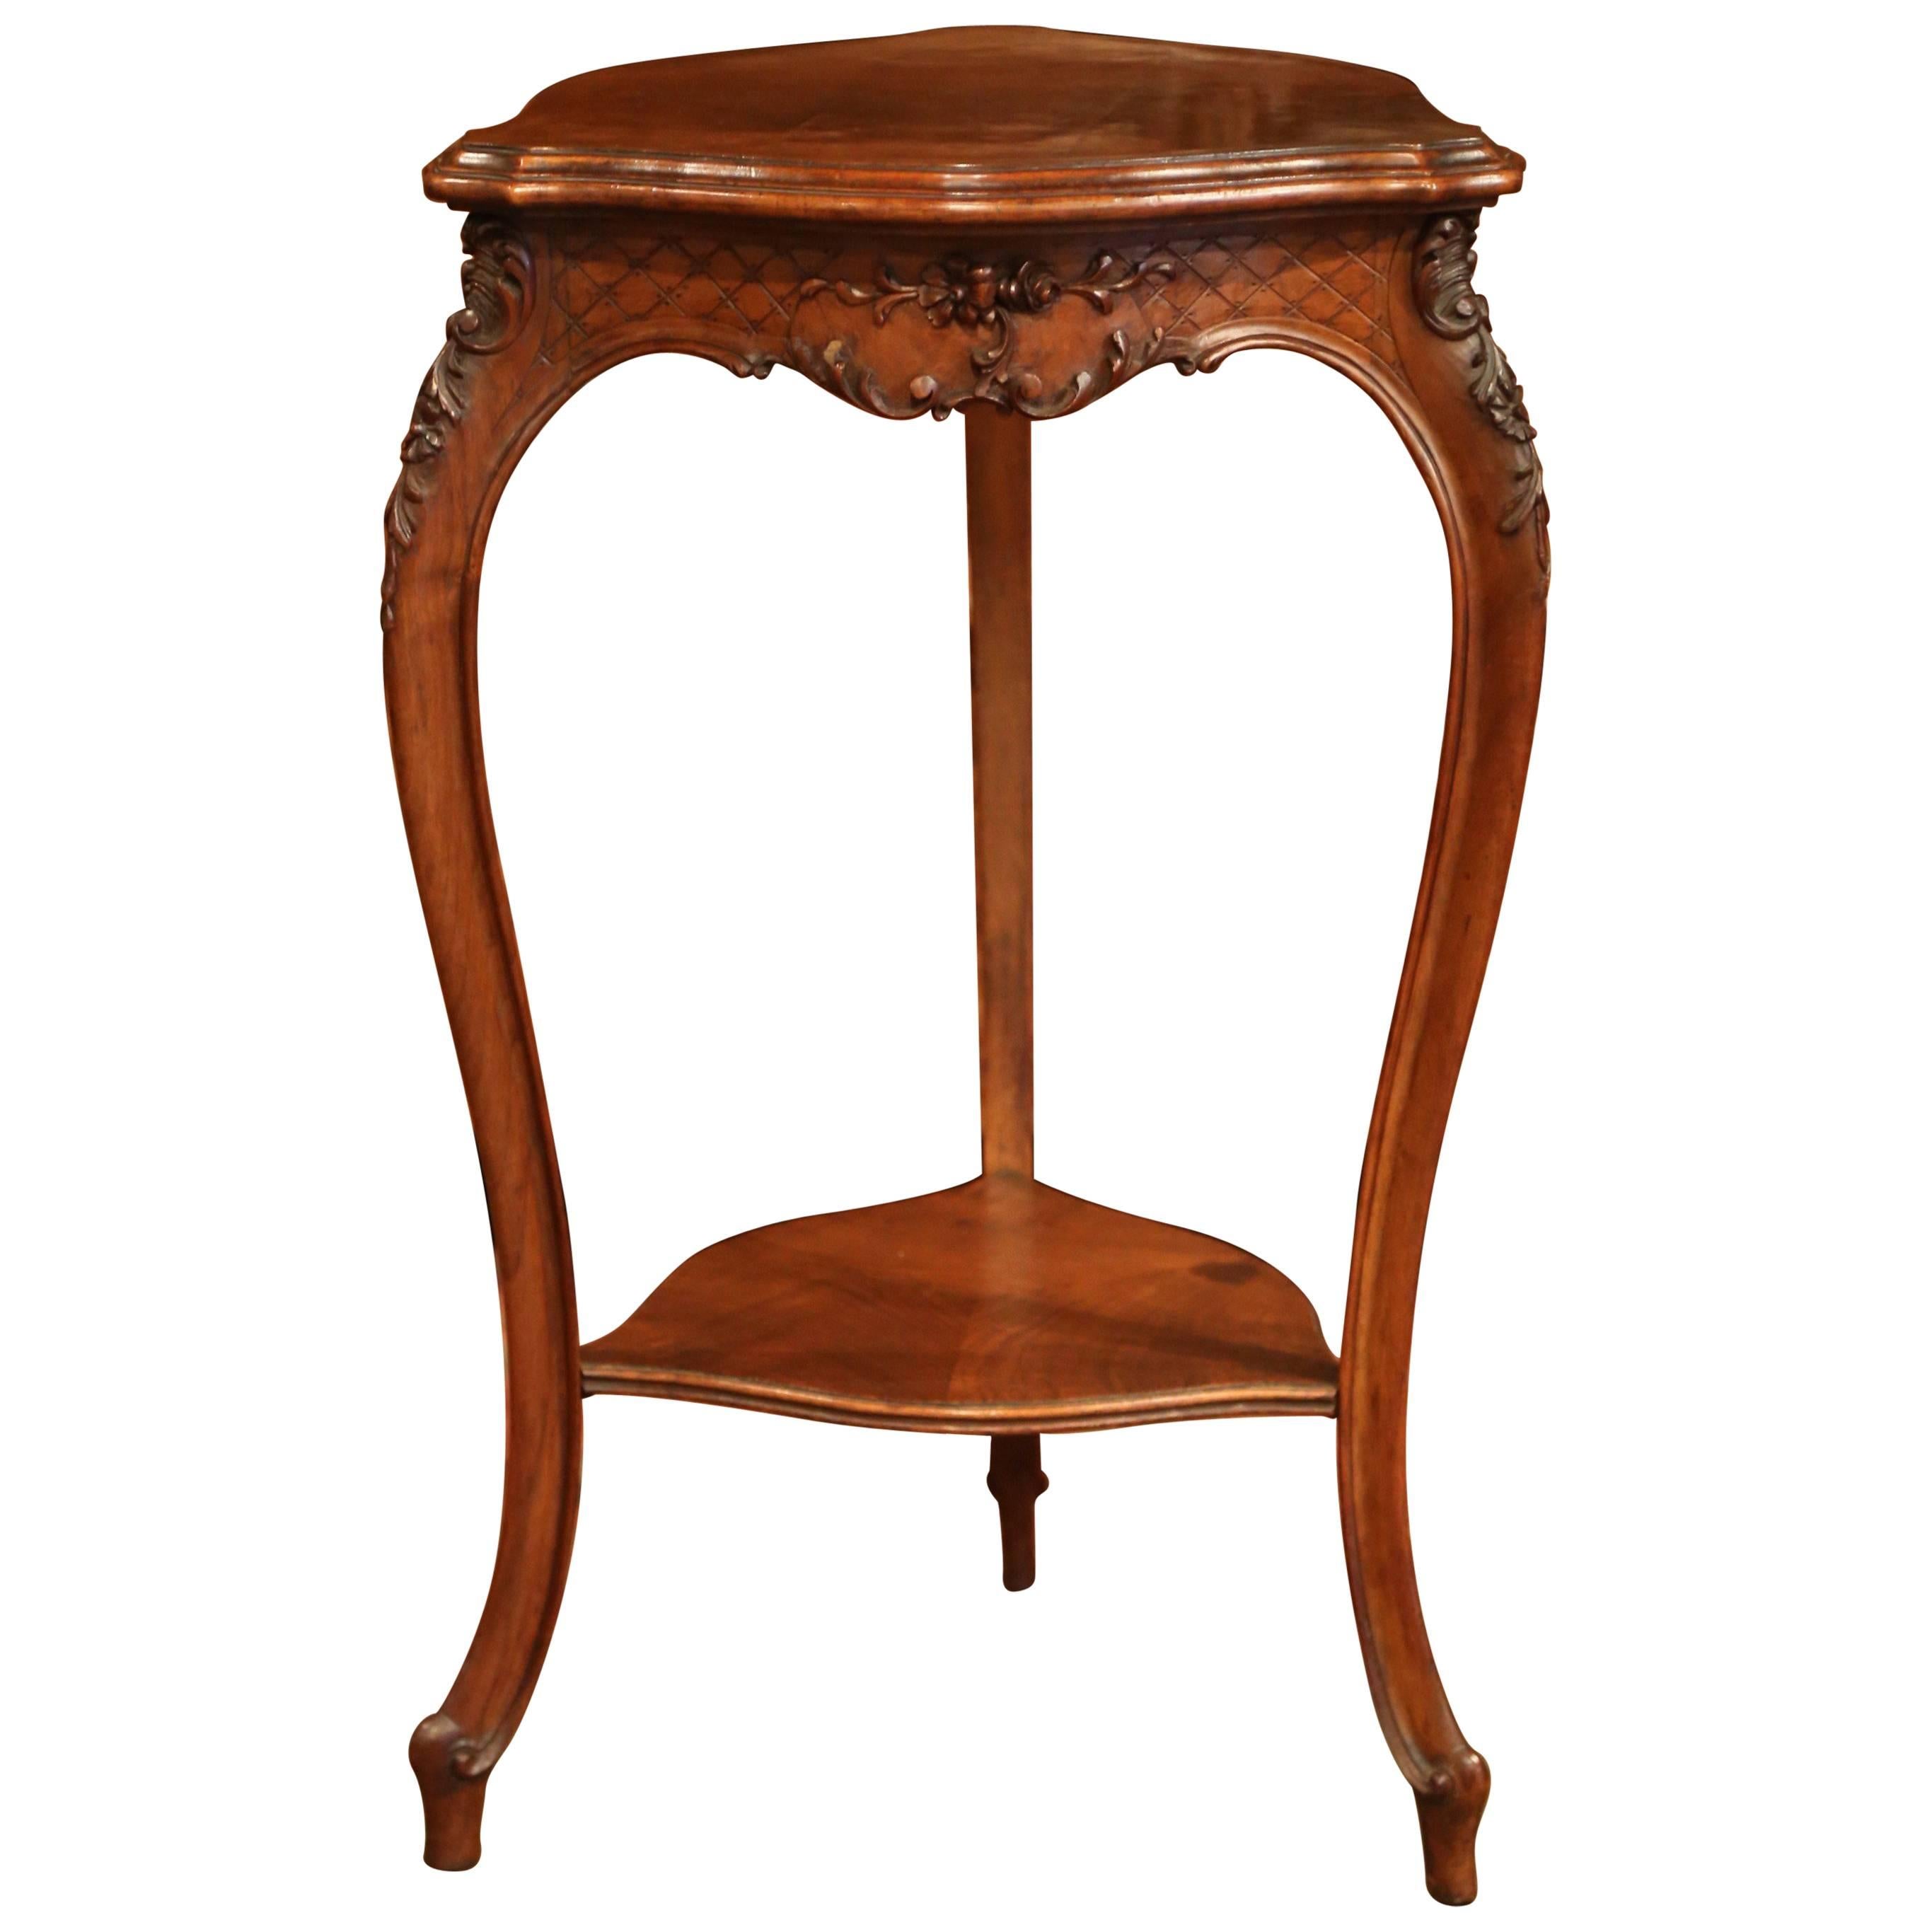 Early 20th Century Louis XV Carved Walnut Triangle Side Table from Provence